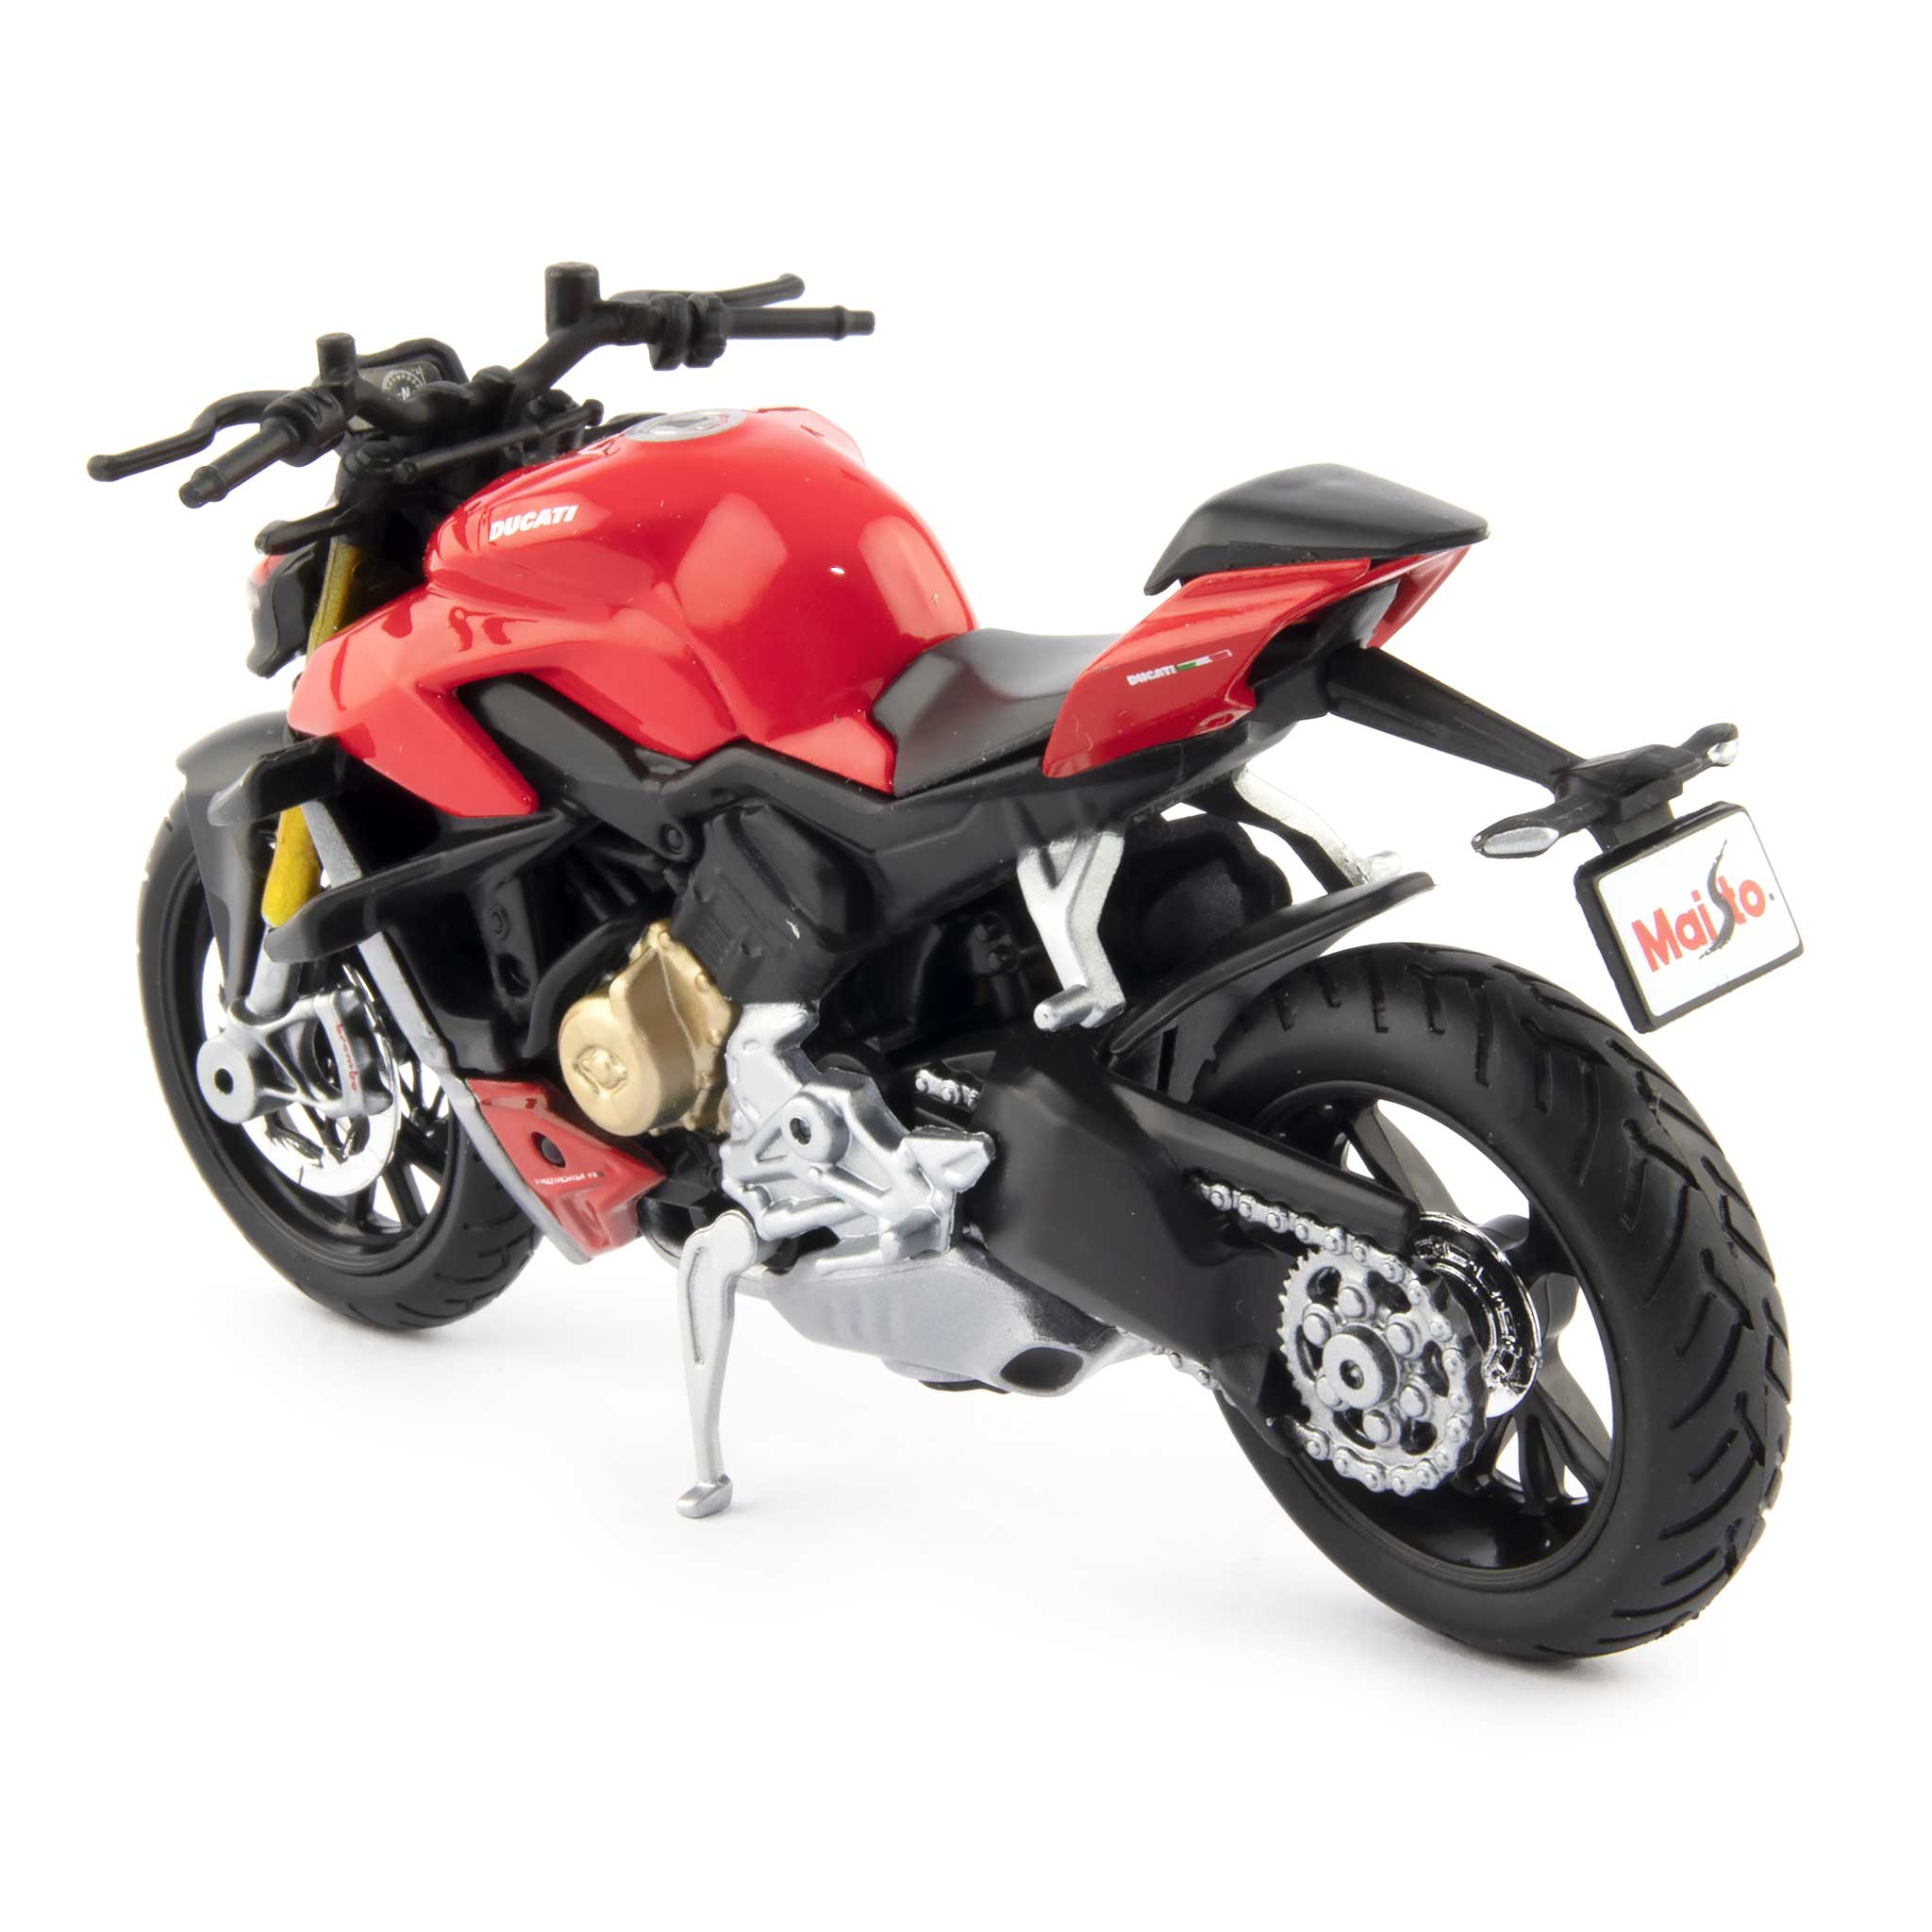 Ducati Streetfighter V4 S Diecast Model Motorcycle red - 1:18 scale-Maisto-Diecast Model Centre